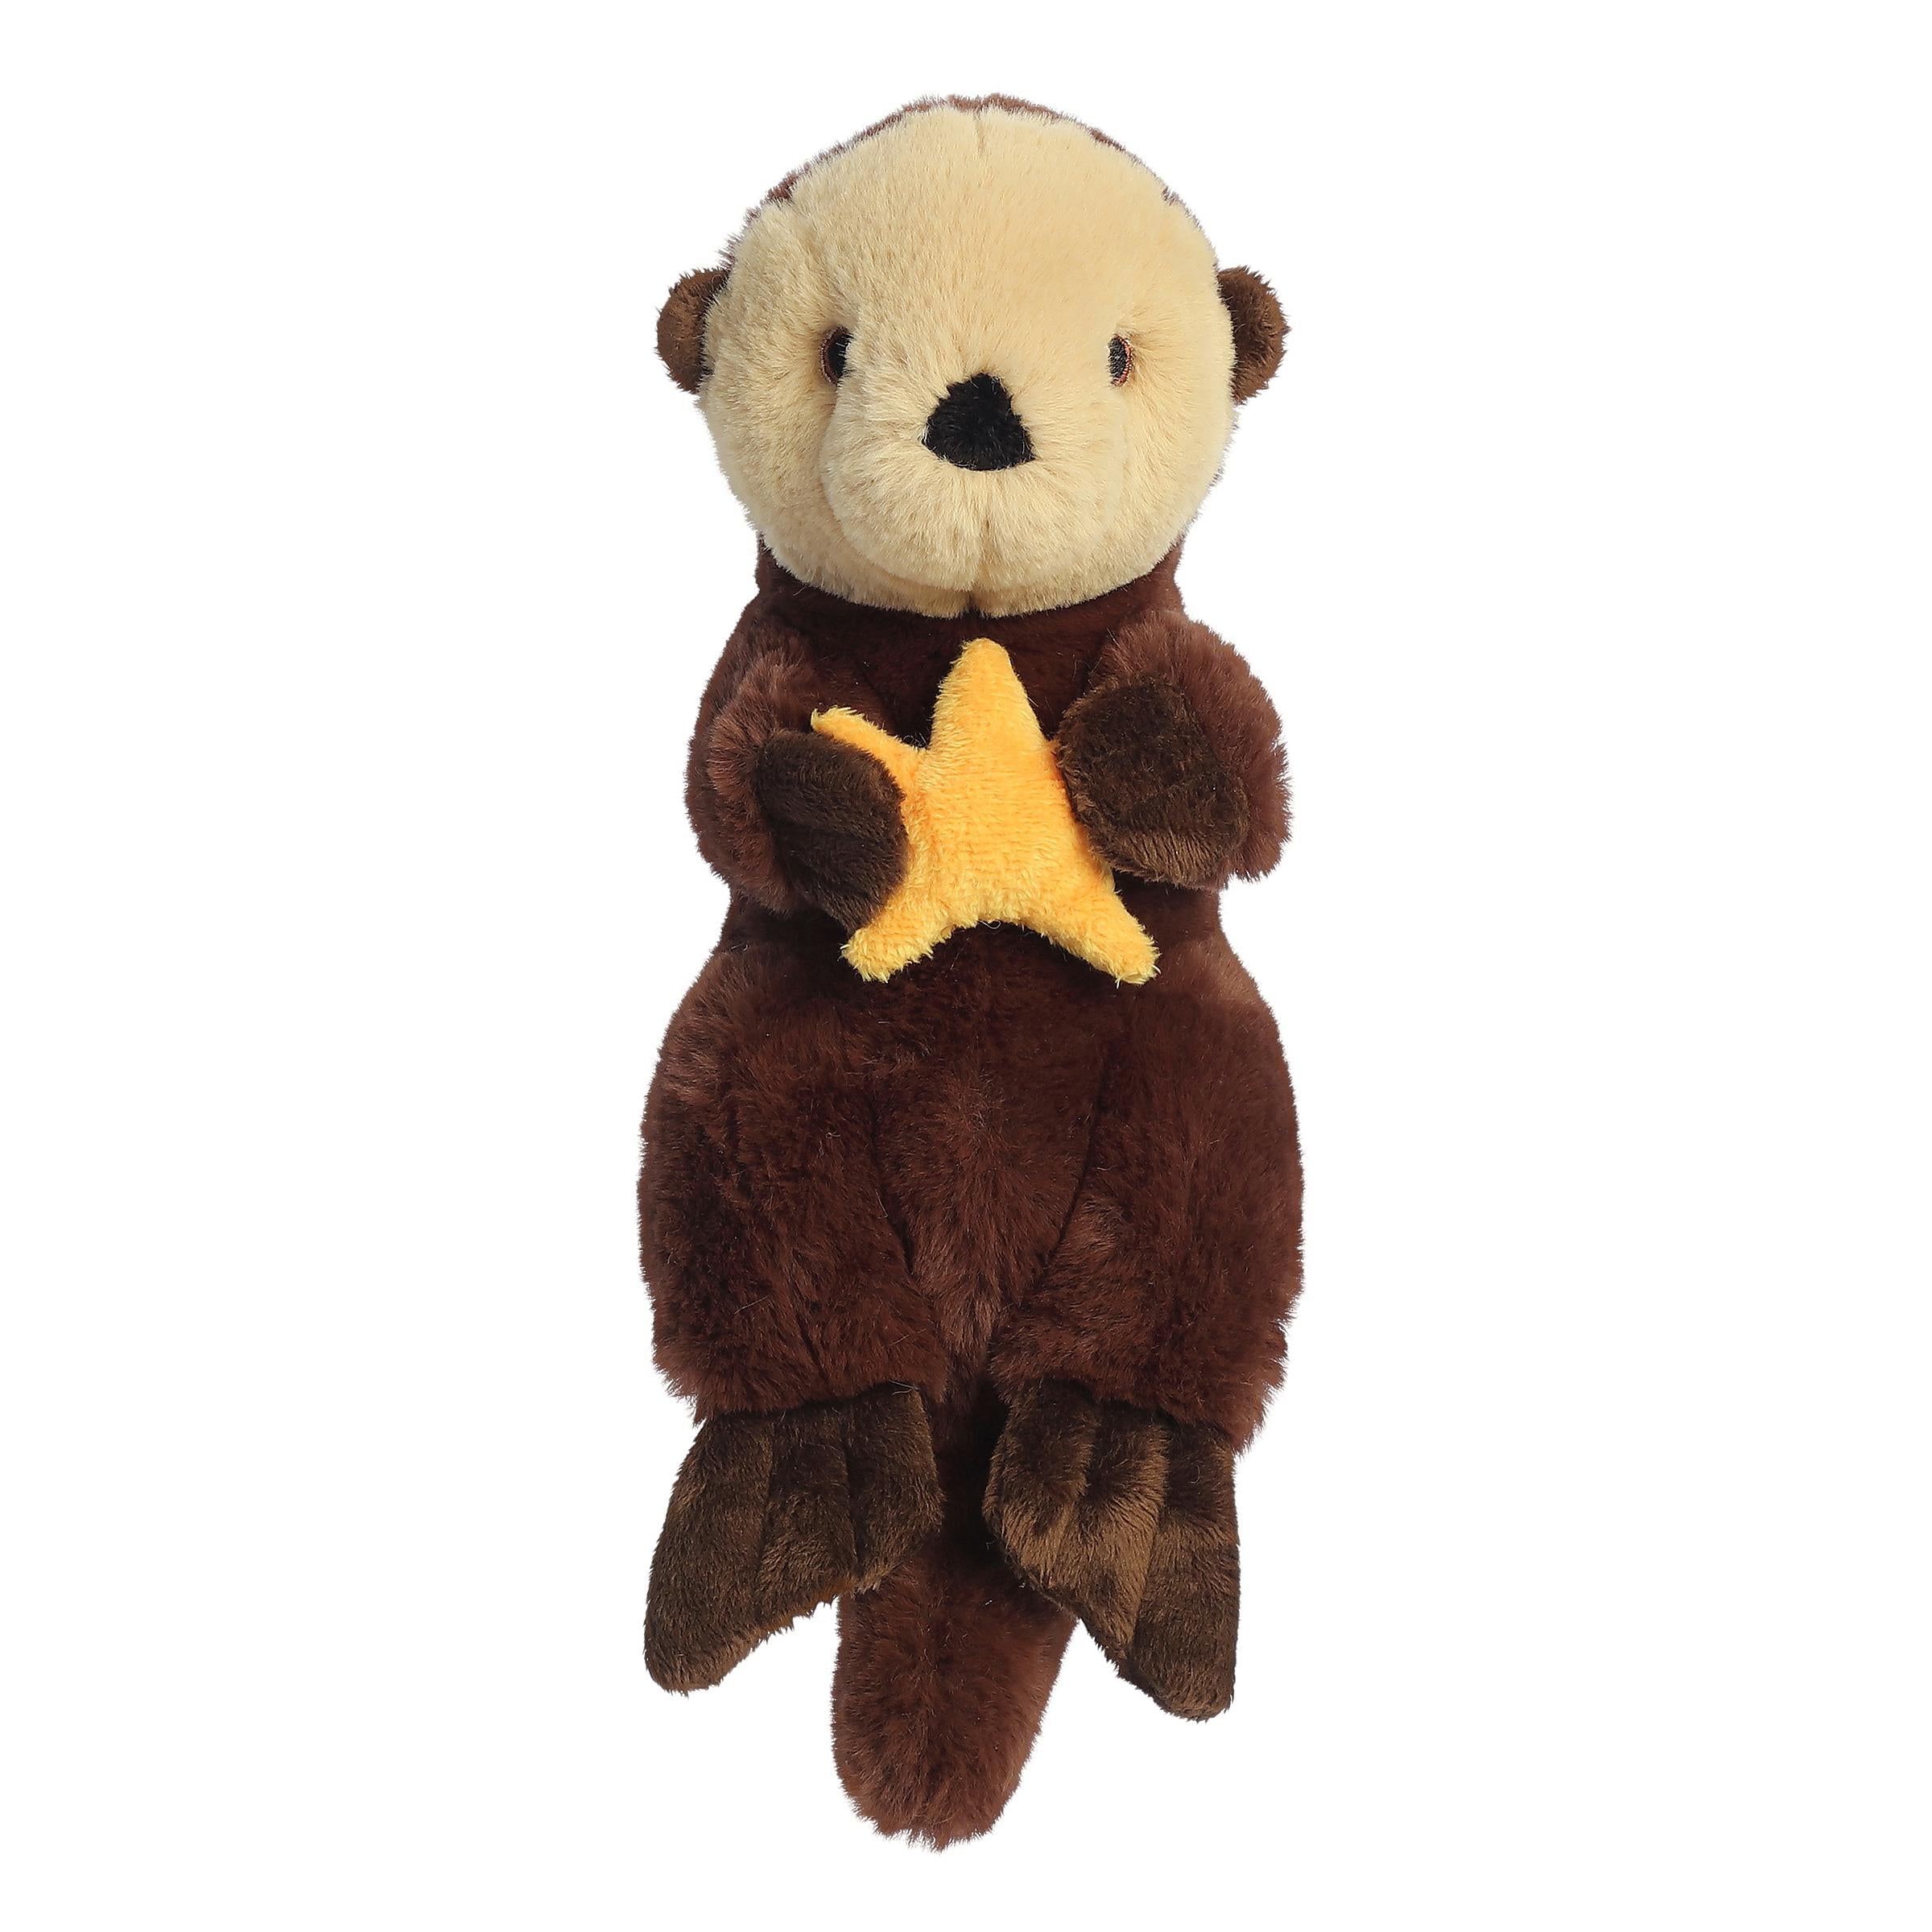 A playful sea otter plush with a rich brown coat holding a yellow seastar, embroidered eyes, and an eco-nation tag